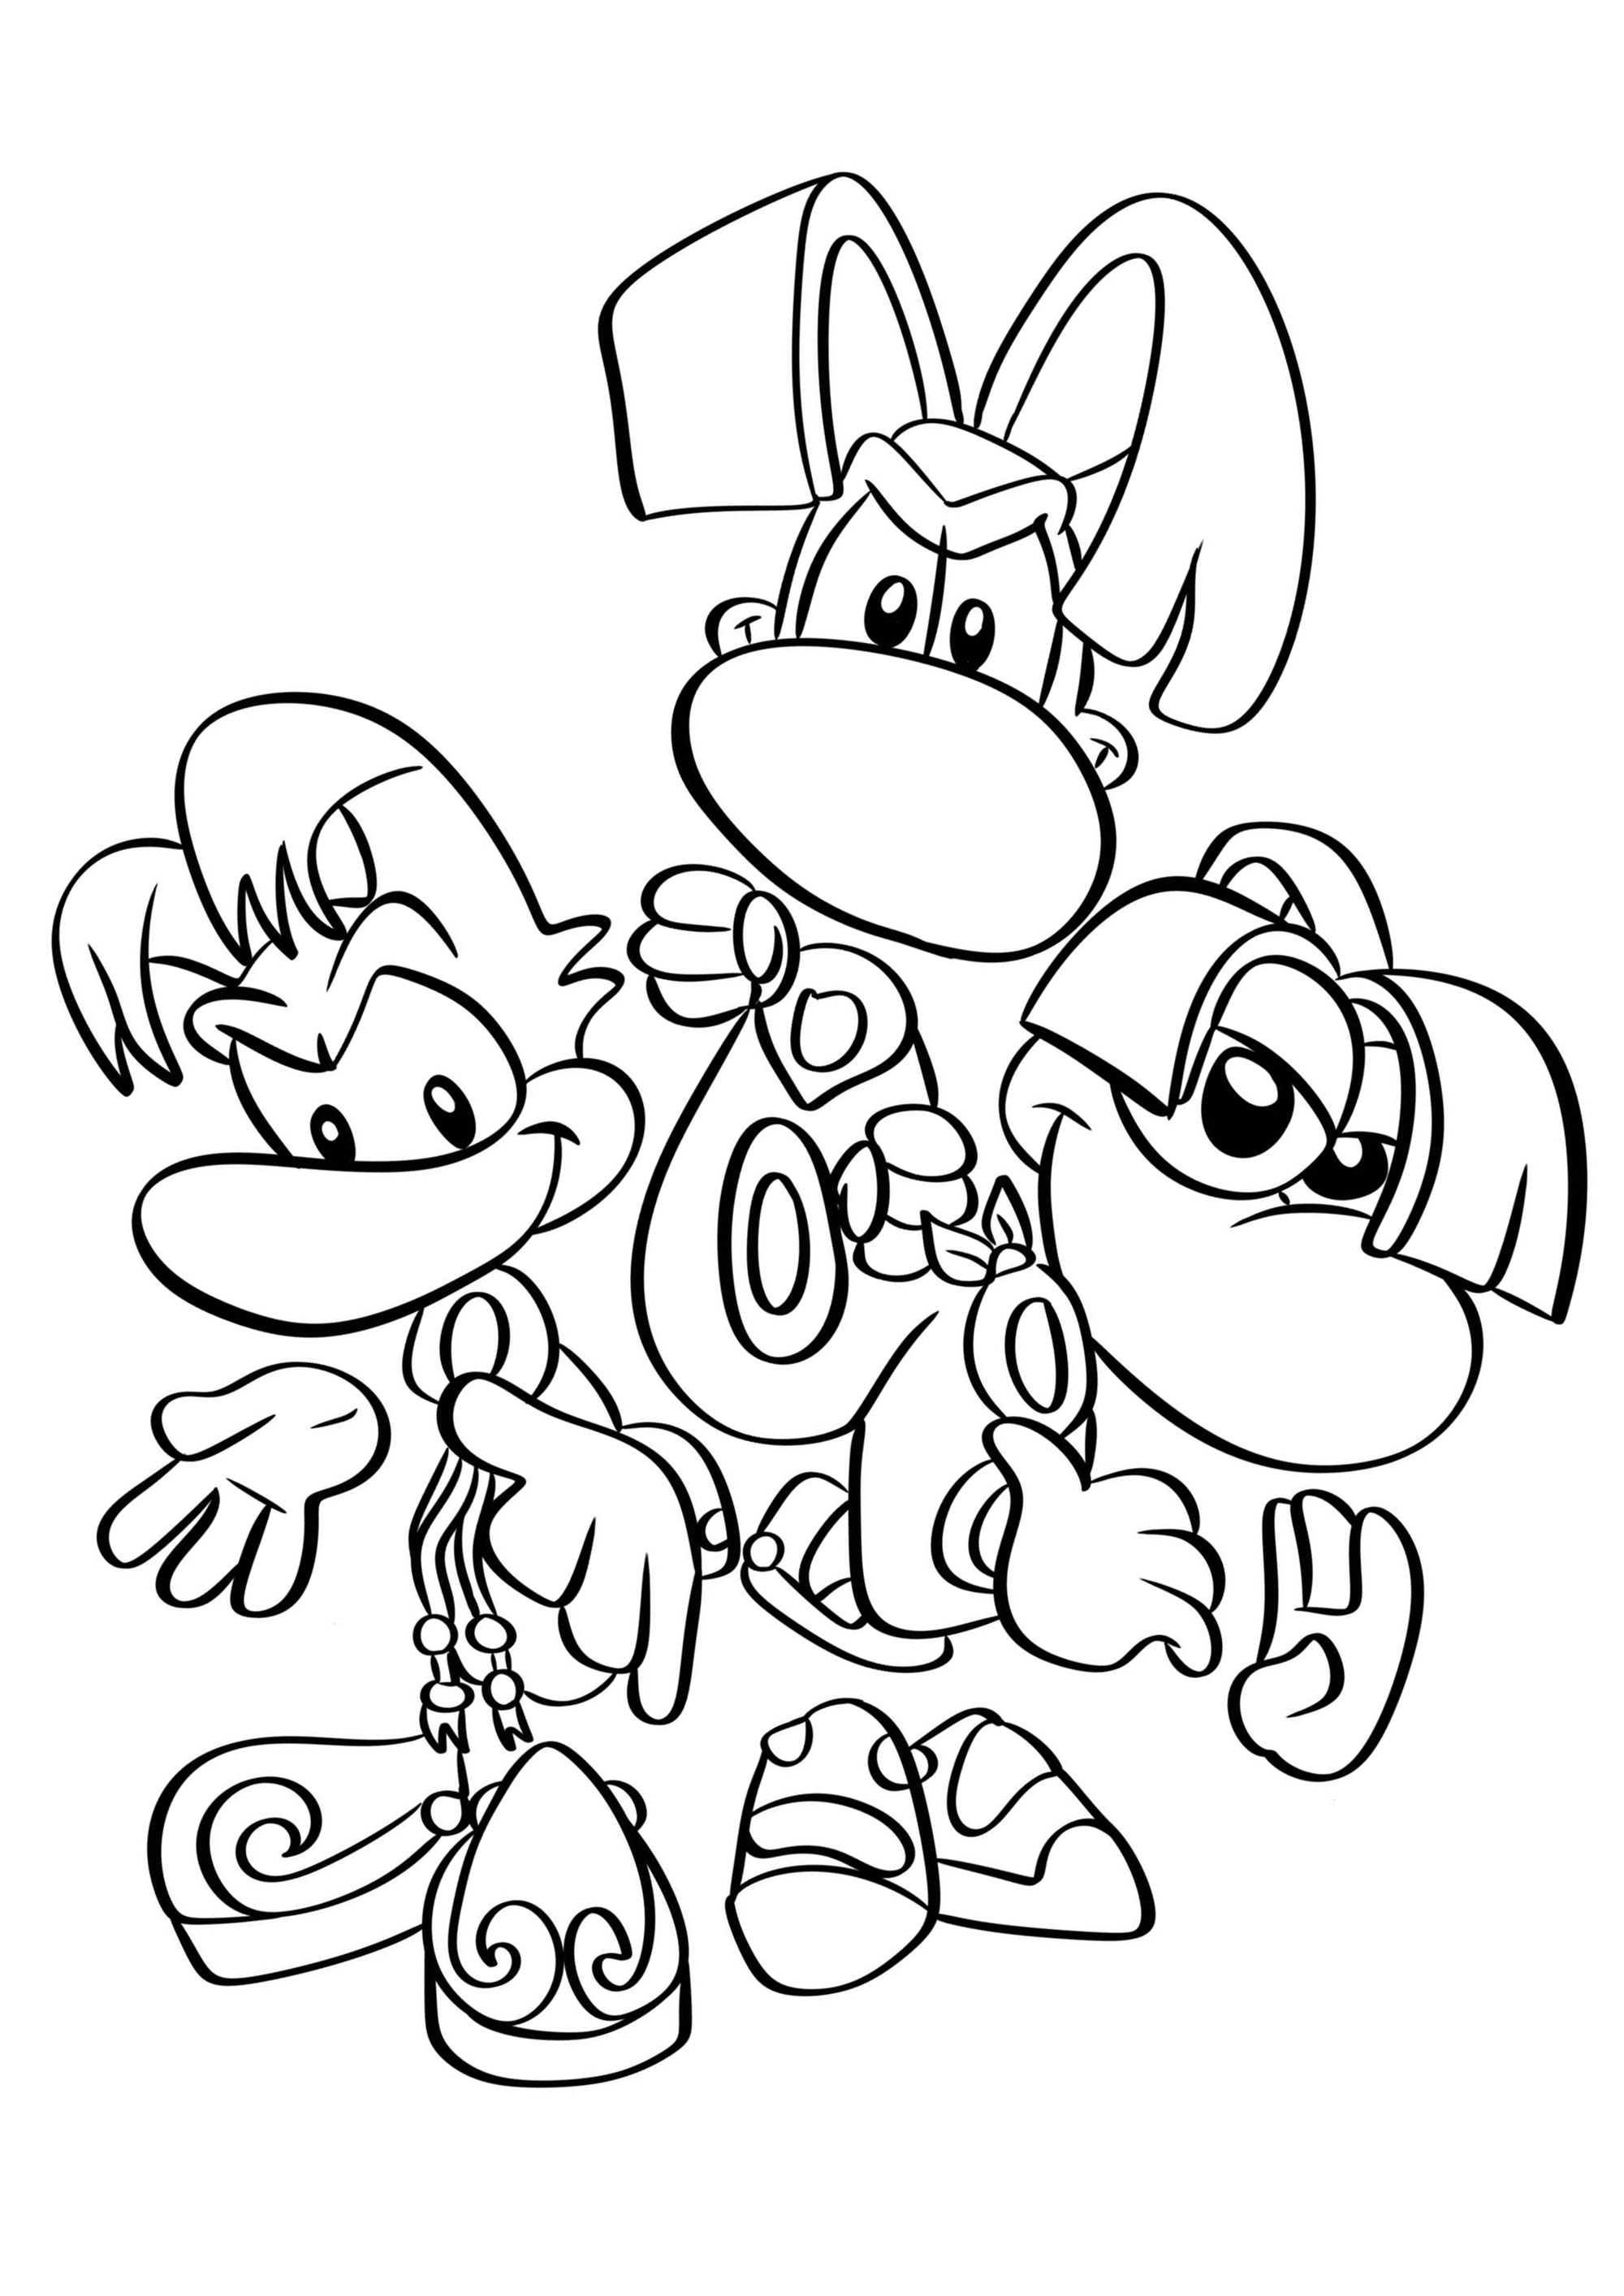 Rayman coloring page with few details for kids